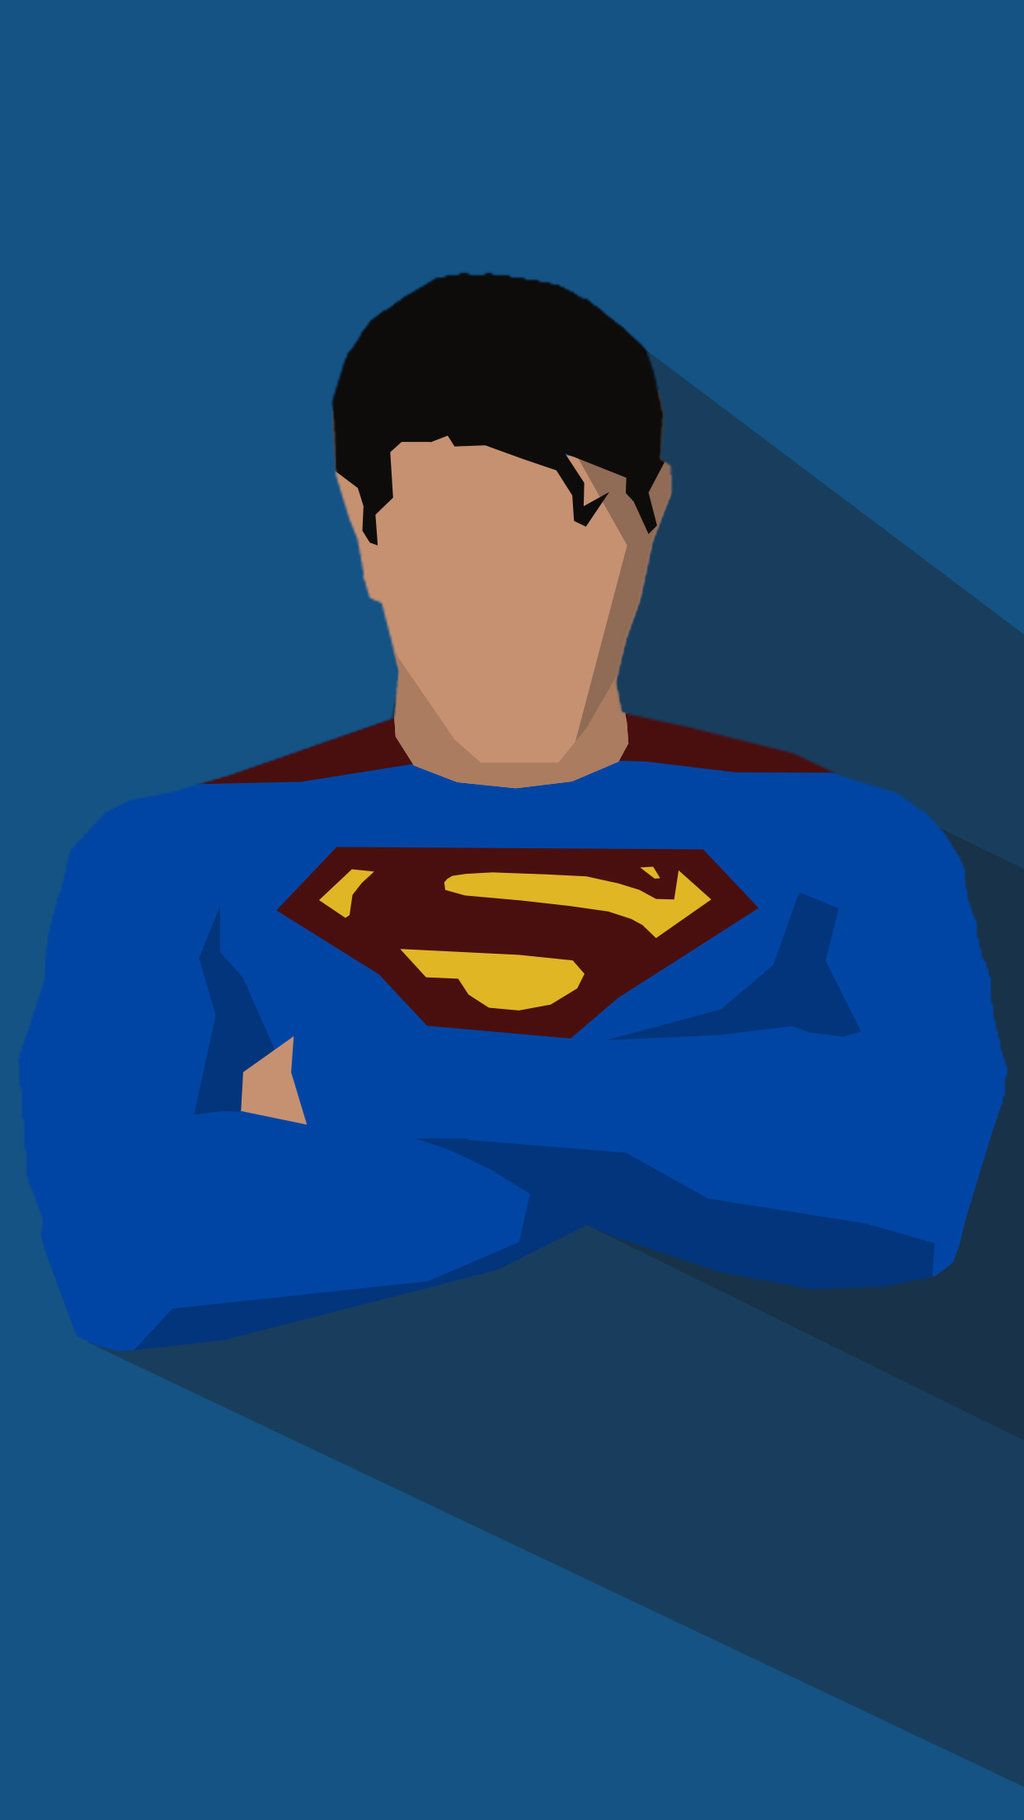 Superman Wallpapers Hd Mobile Iphone Galaxy Wallpaper Mobile  फट शयर